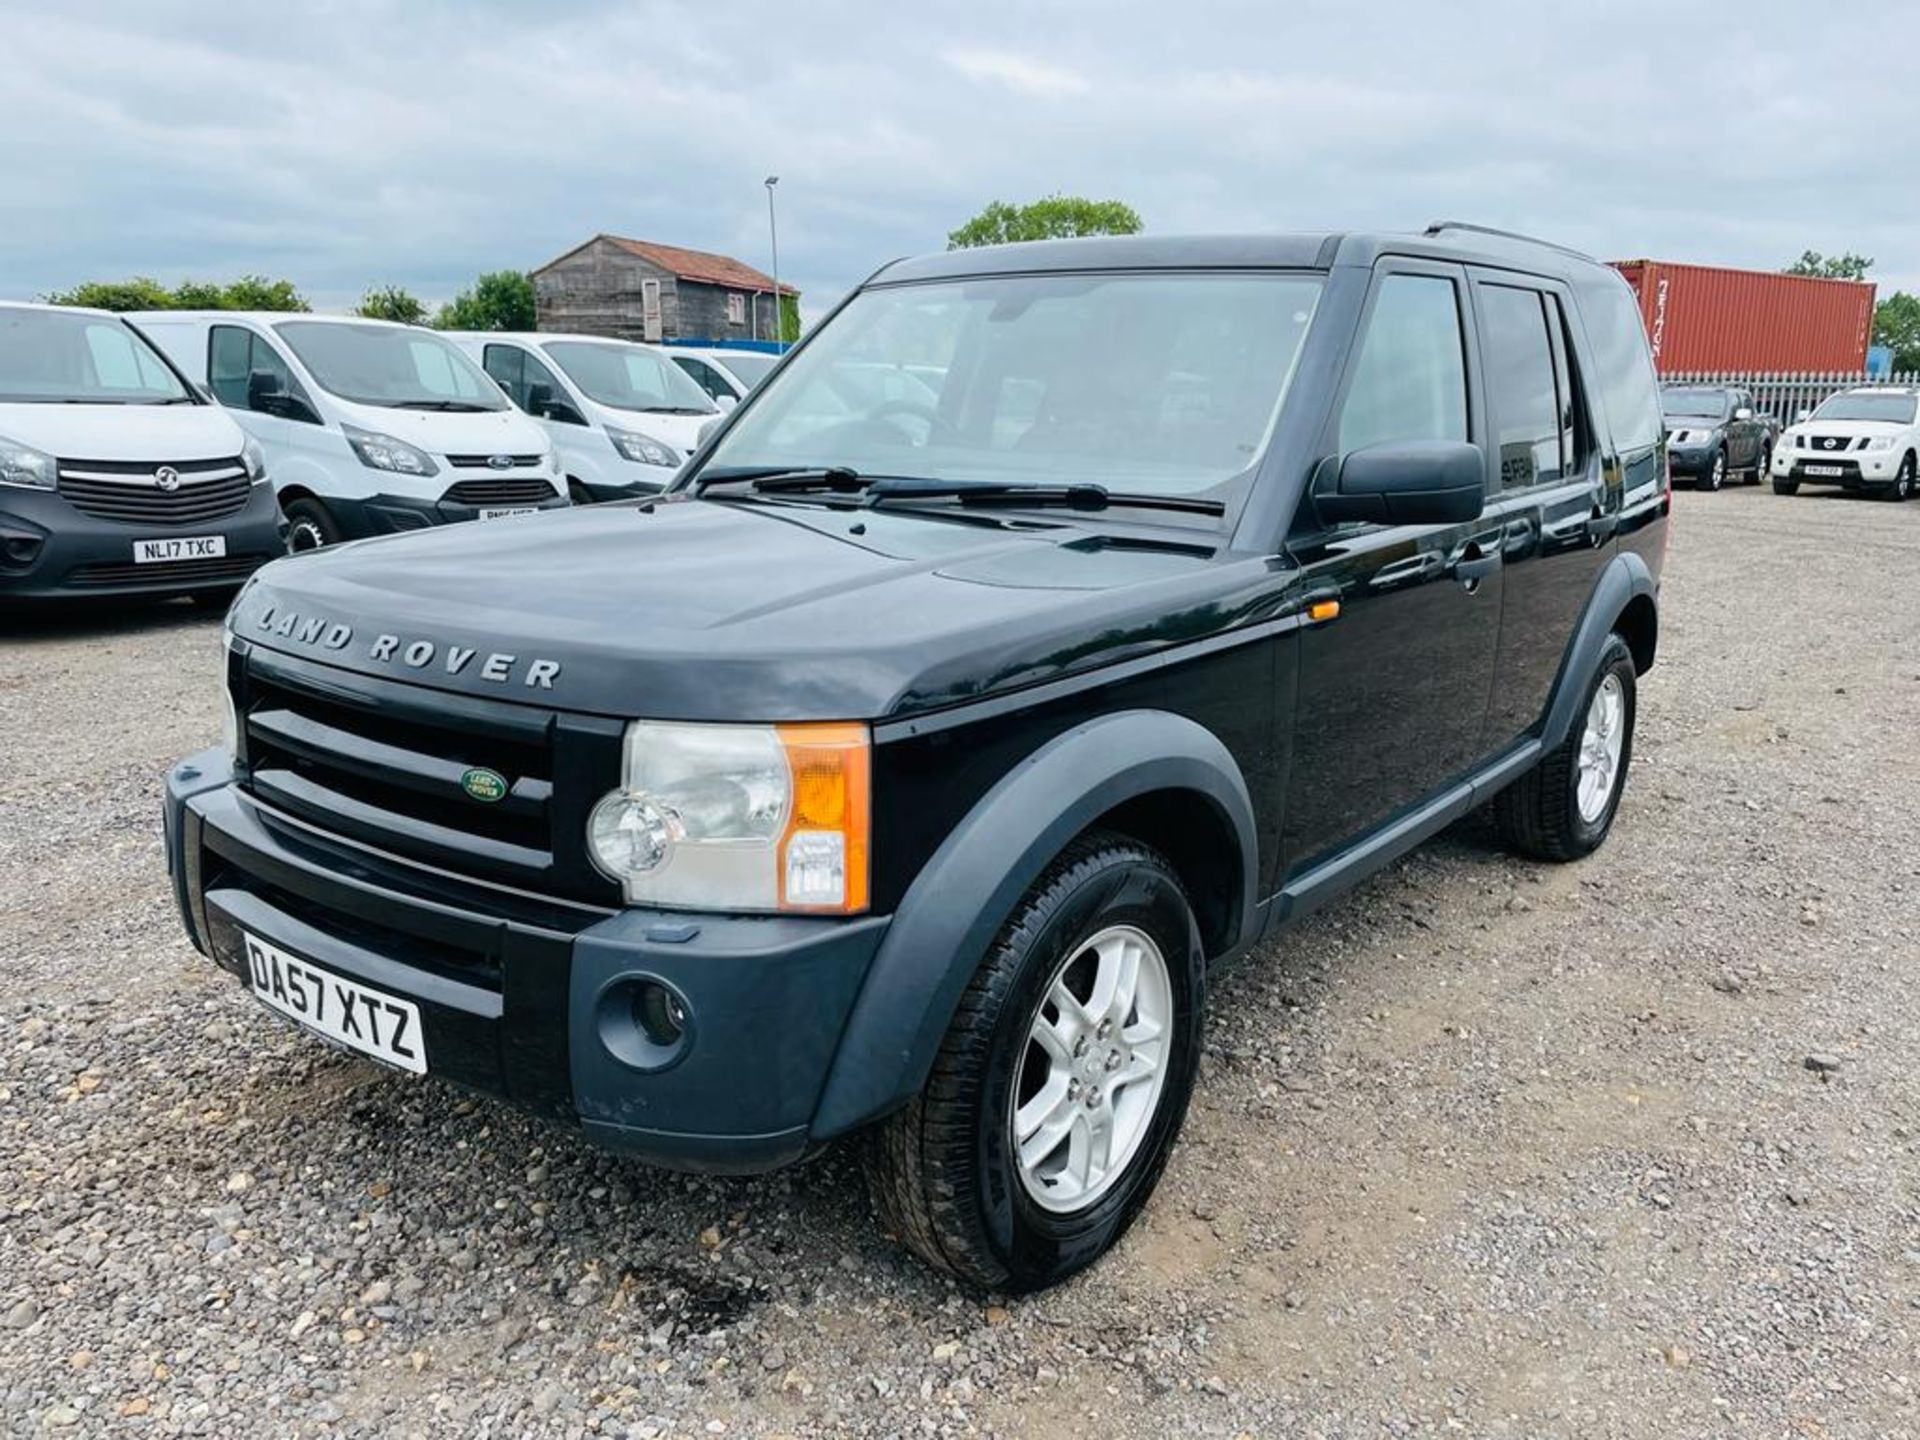 ** ON SALE ** Land Rover Discovery 3 2.7 TDV6 XS Commercial 2008 '57 Reg' A/C - All Terrain Settings - Image 3 of 29